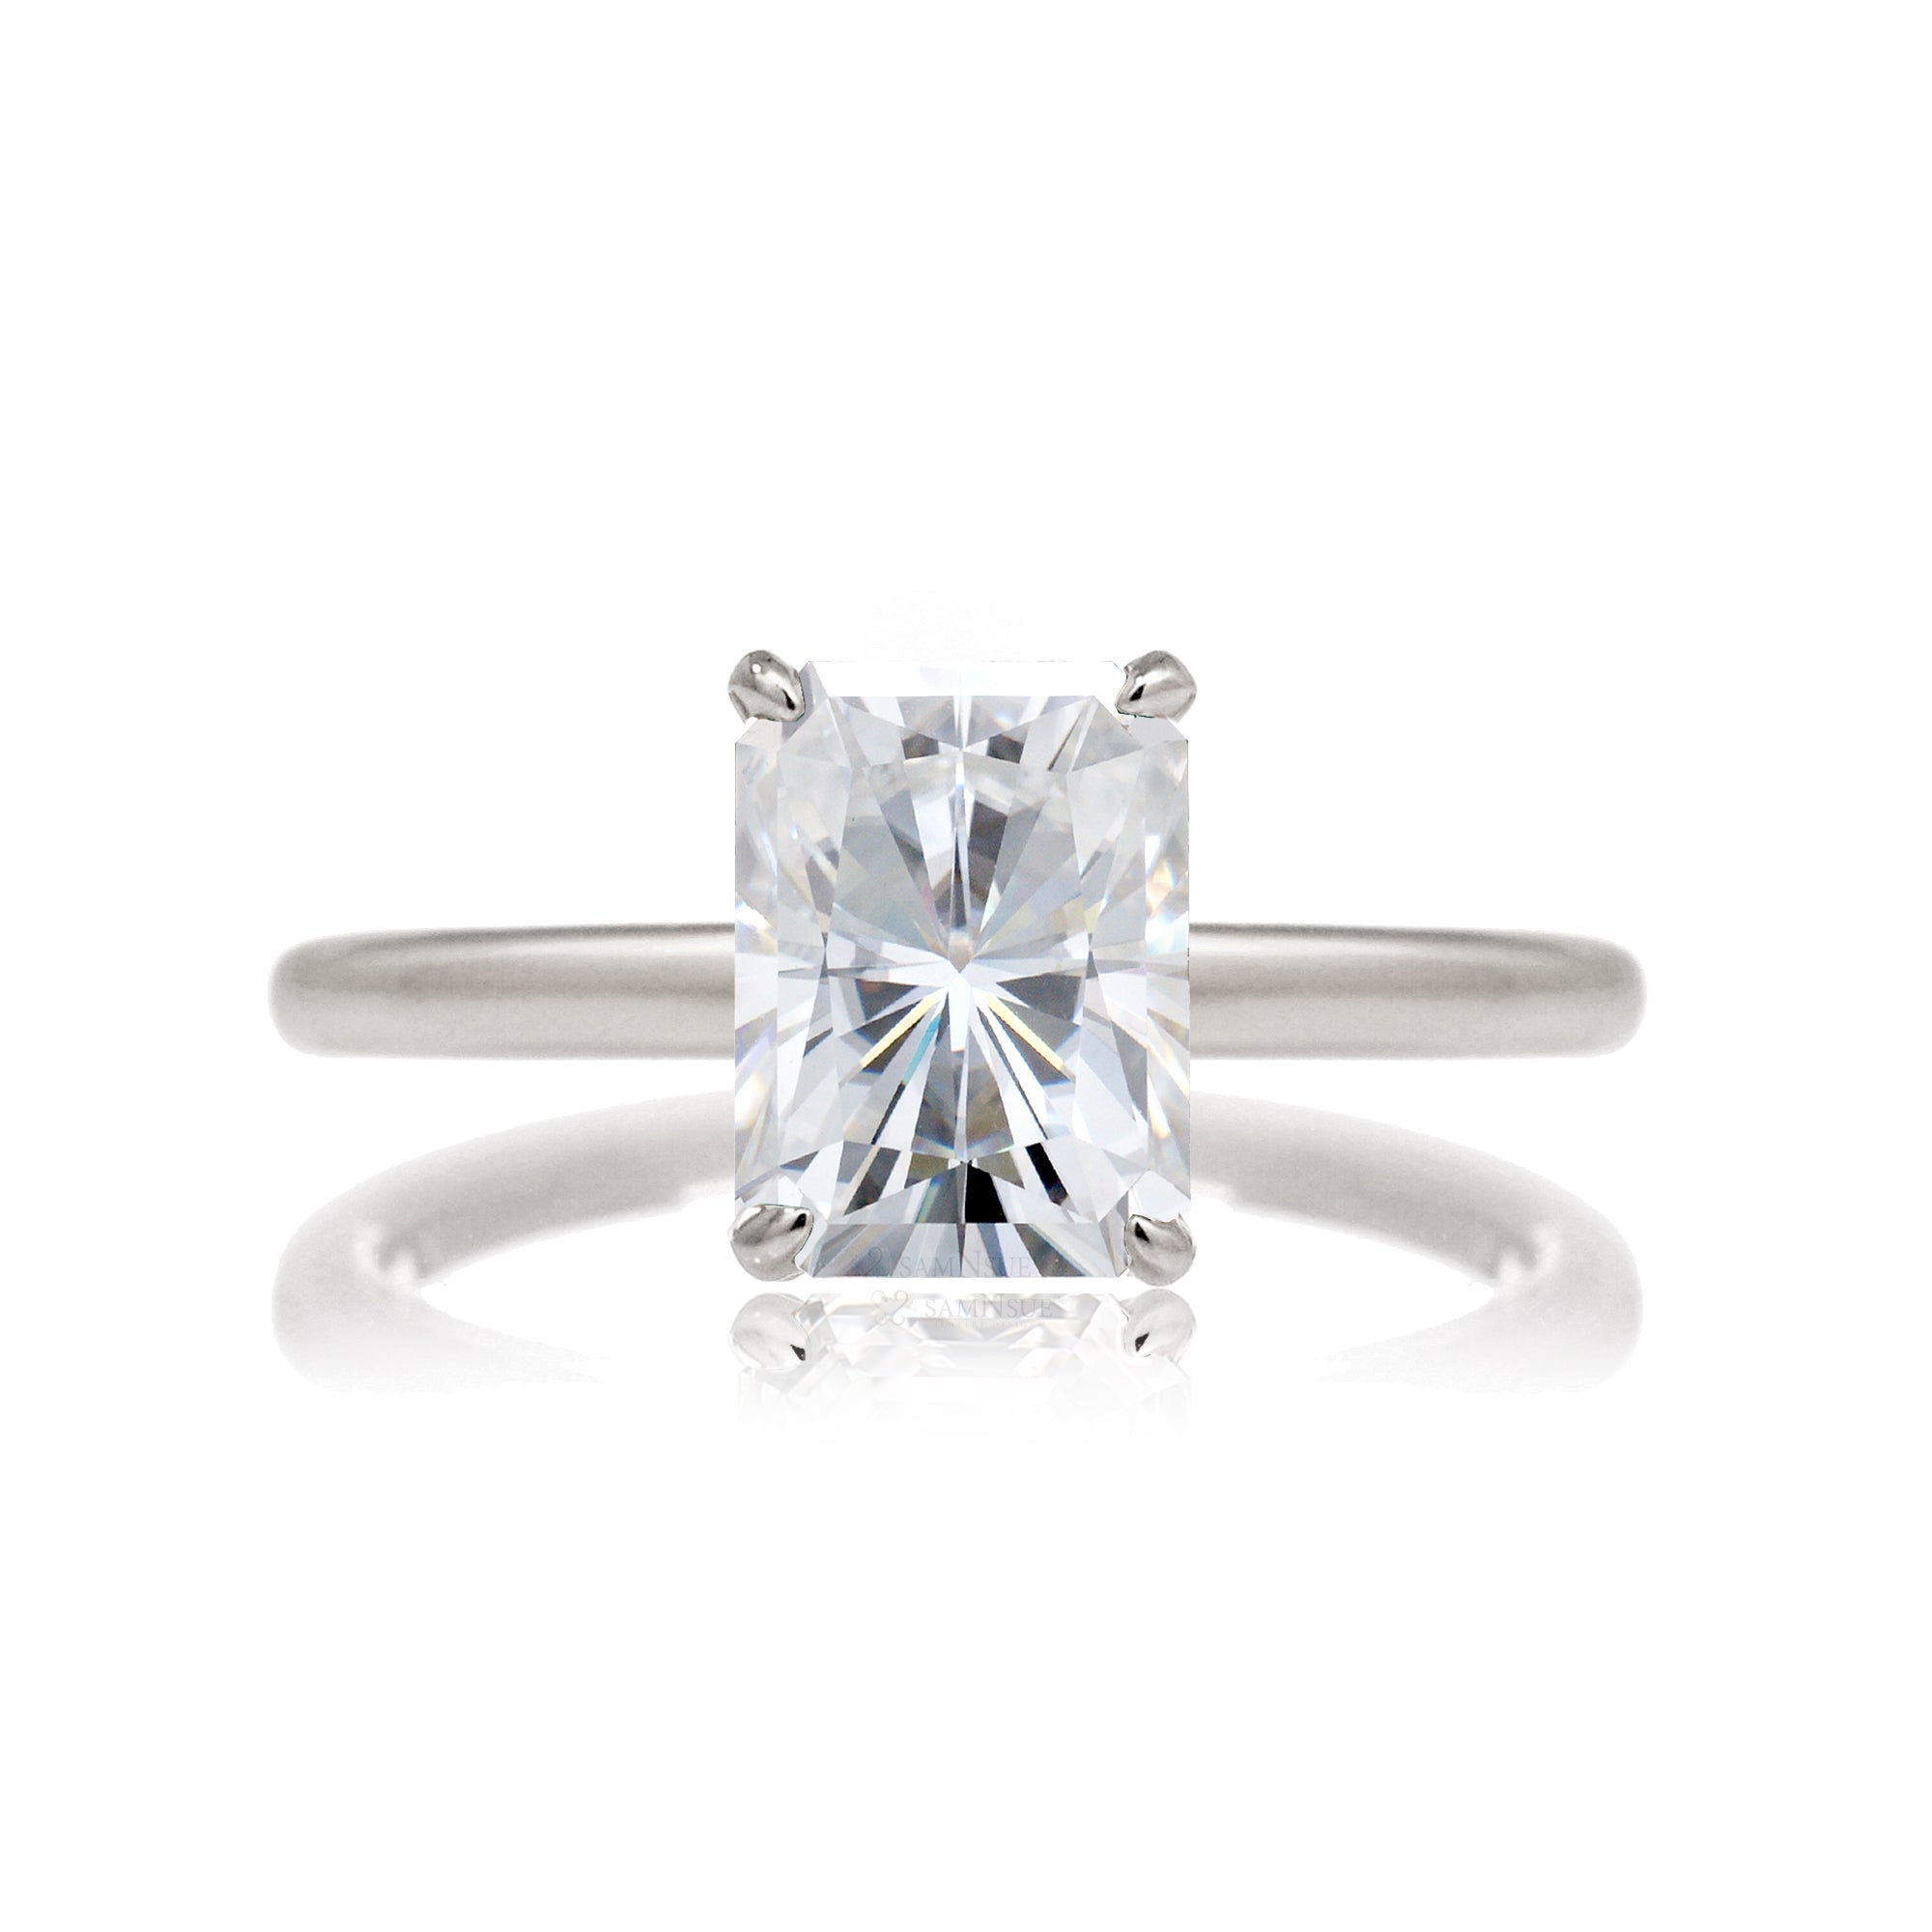 Radiant Moissanite solitaire engagement ring hidden halo solid band white gold